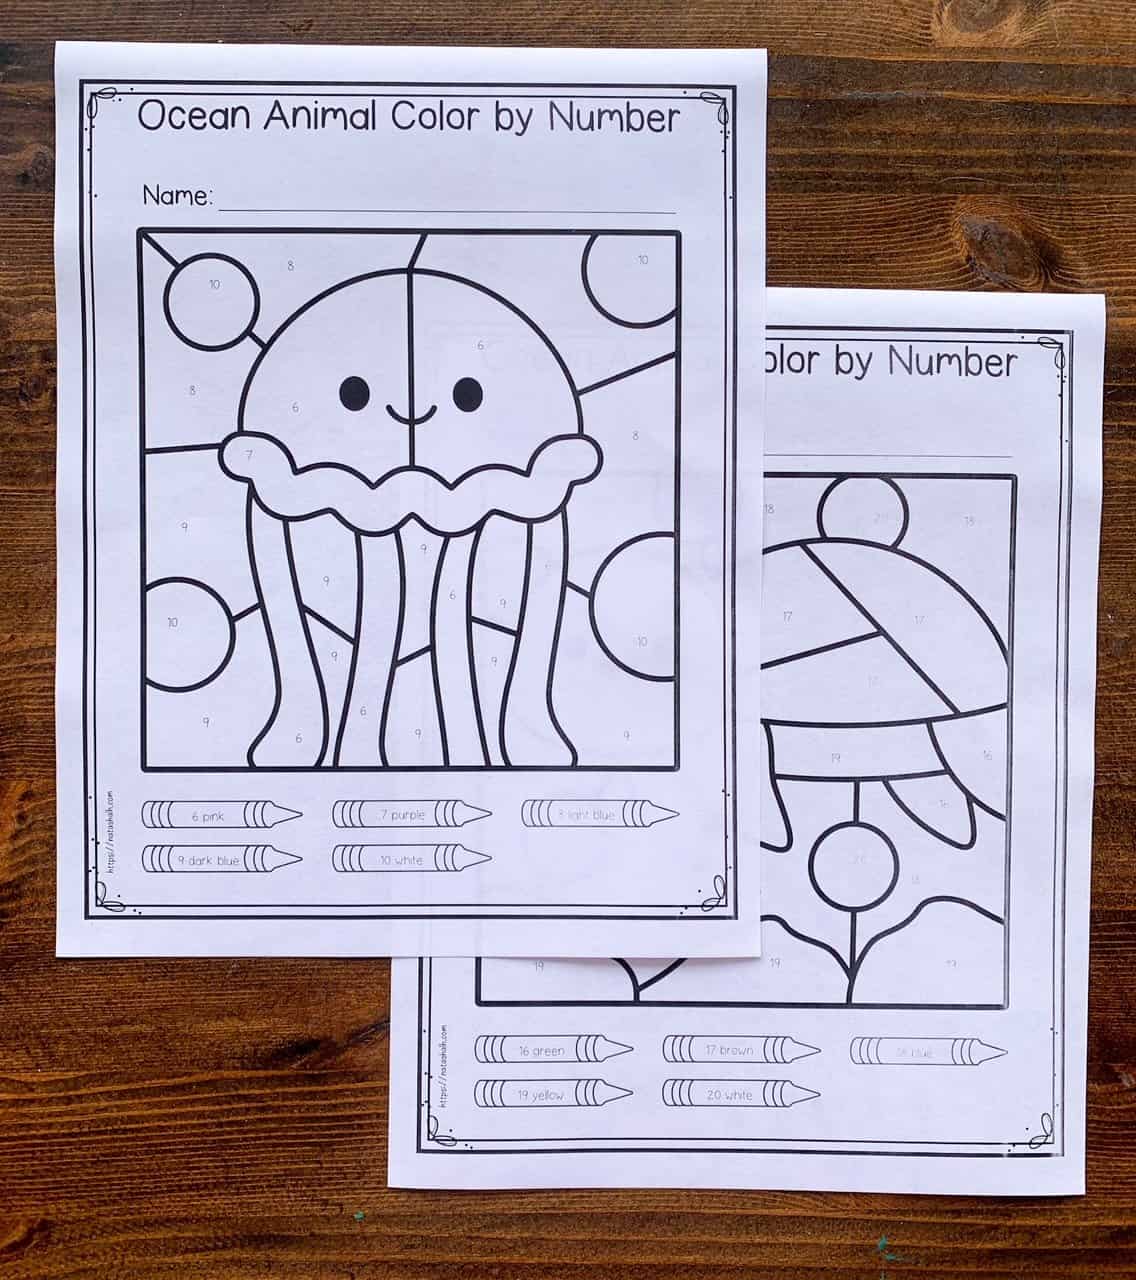 A photo of two ocean animal color by number worksheets. One shows a jellyfish and the other a sea turtle.